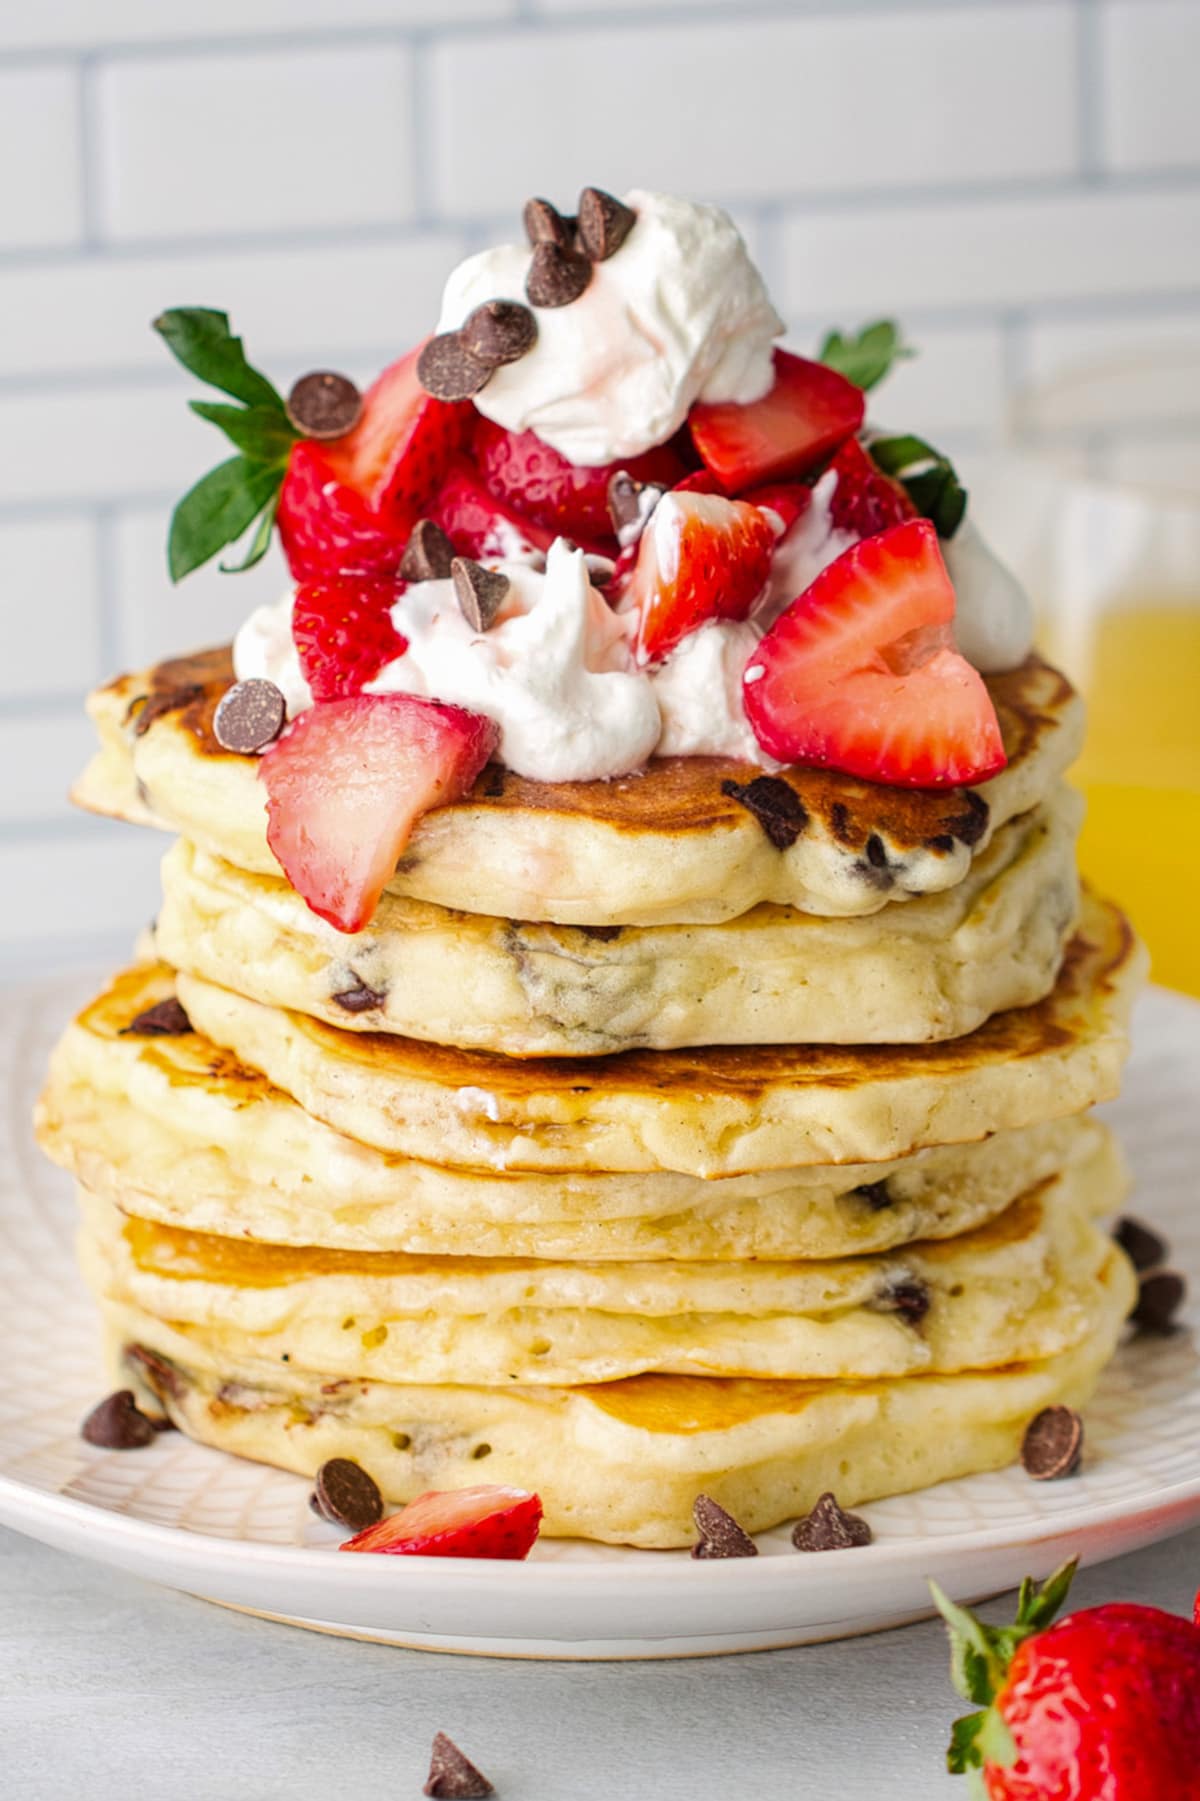 A stack of chocolate chip pancakes topped with whipped cream and sliced strawberries.